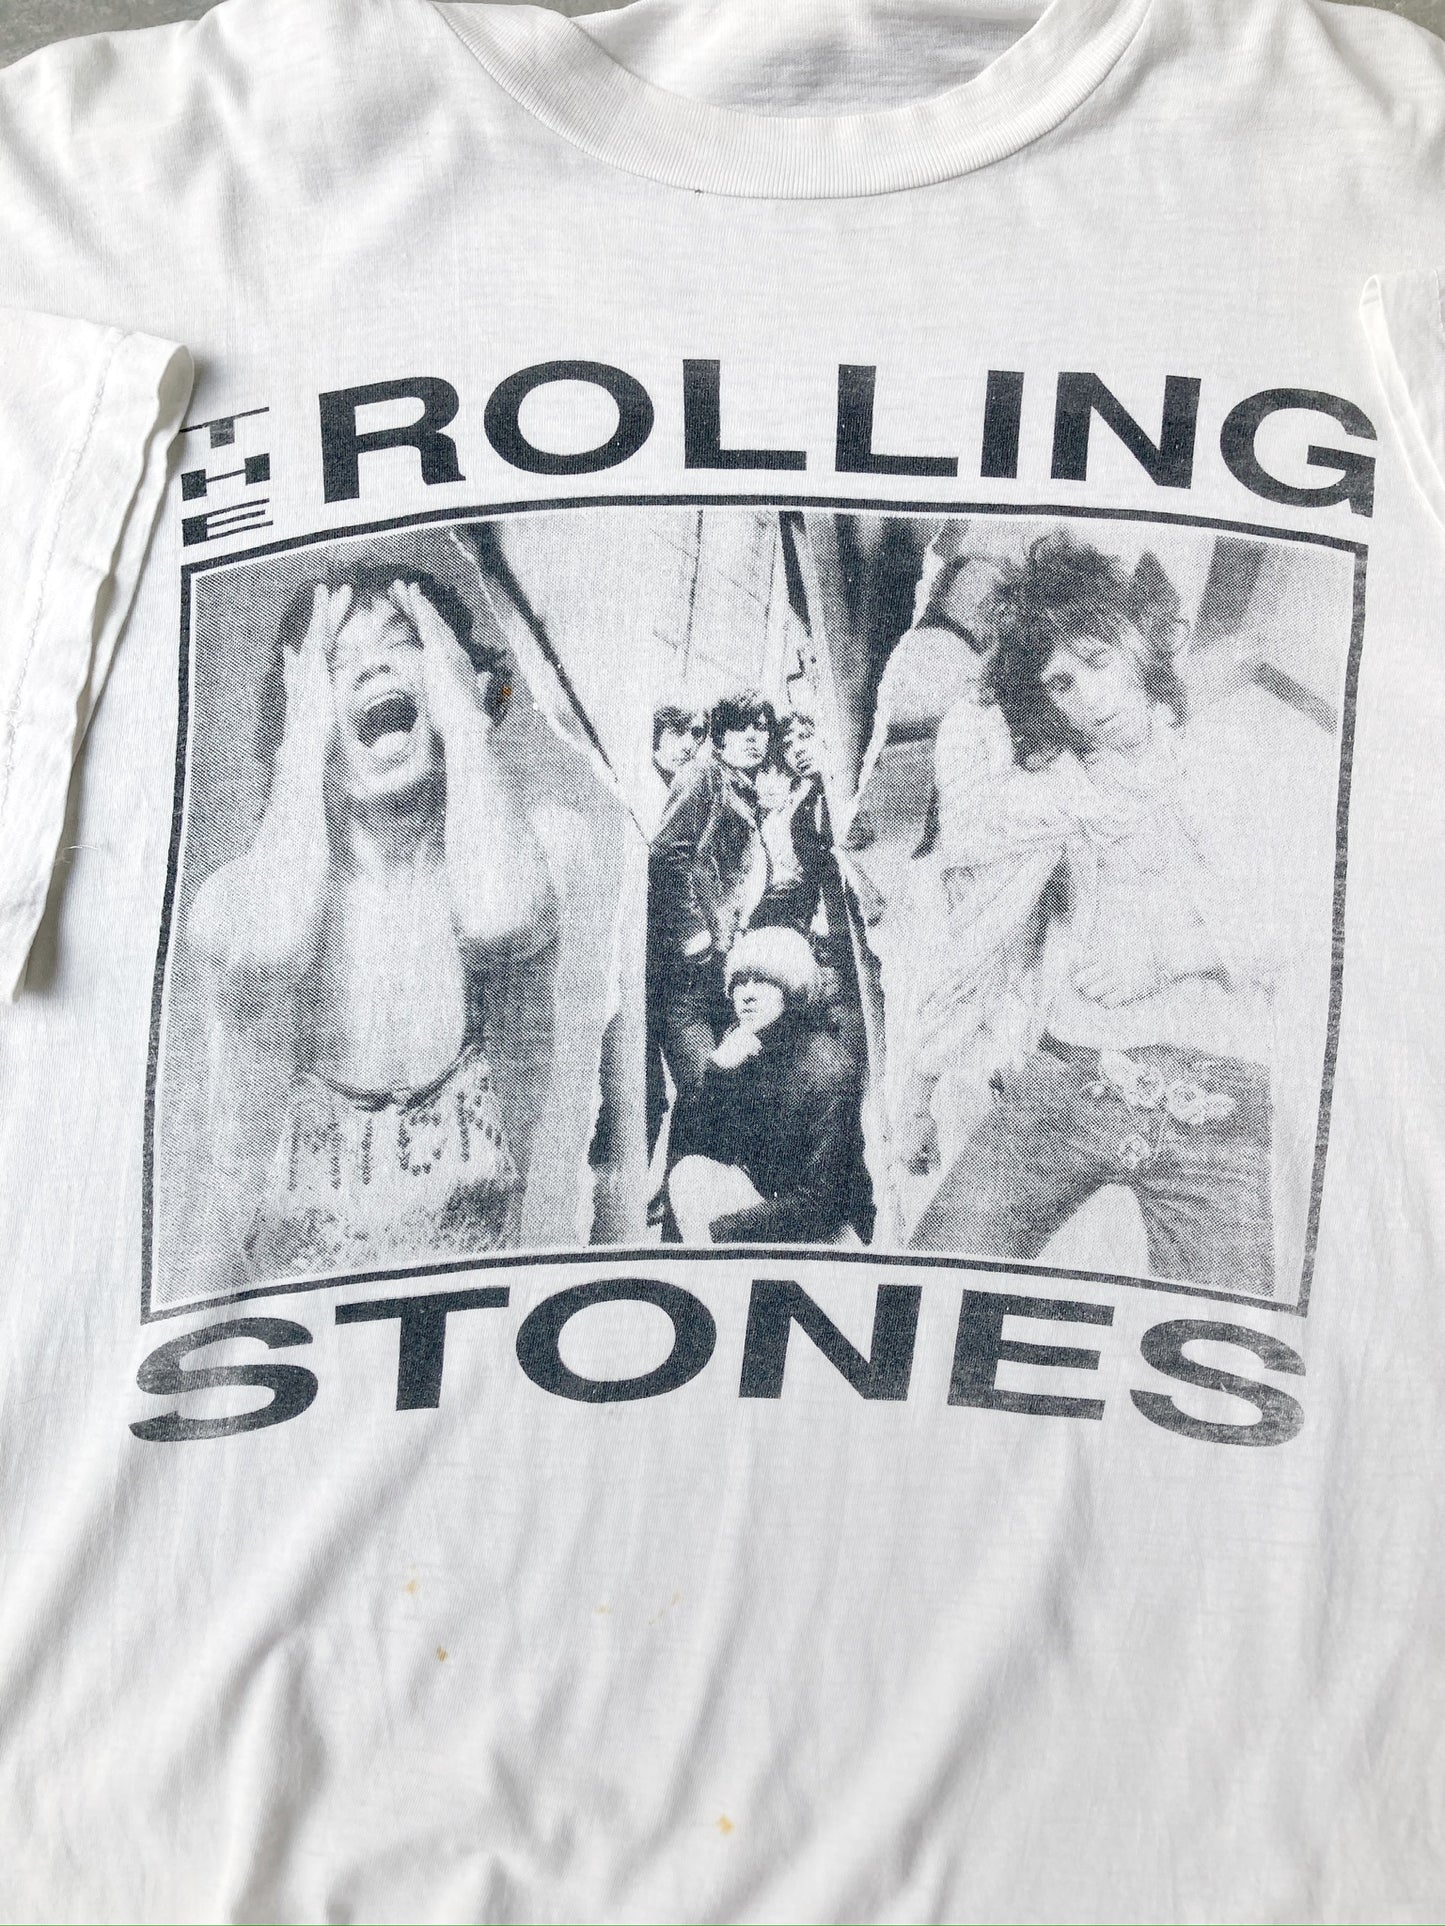 The Rolling Stones T-Shirt 90's - Large